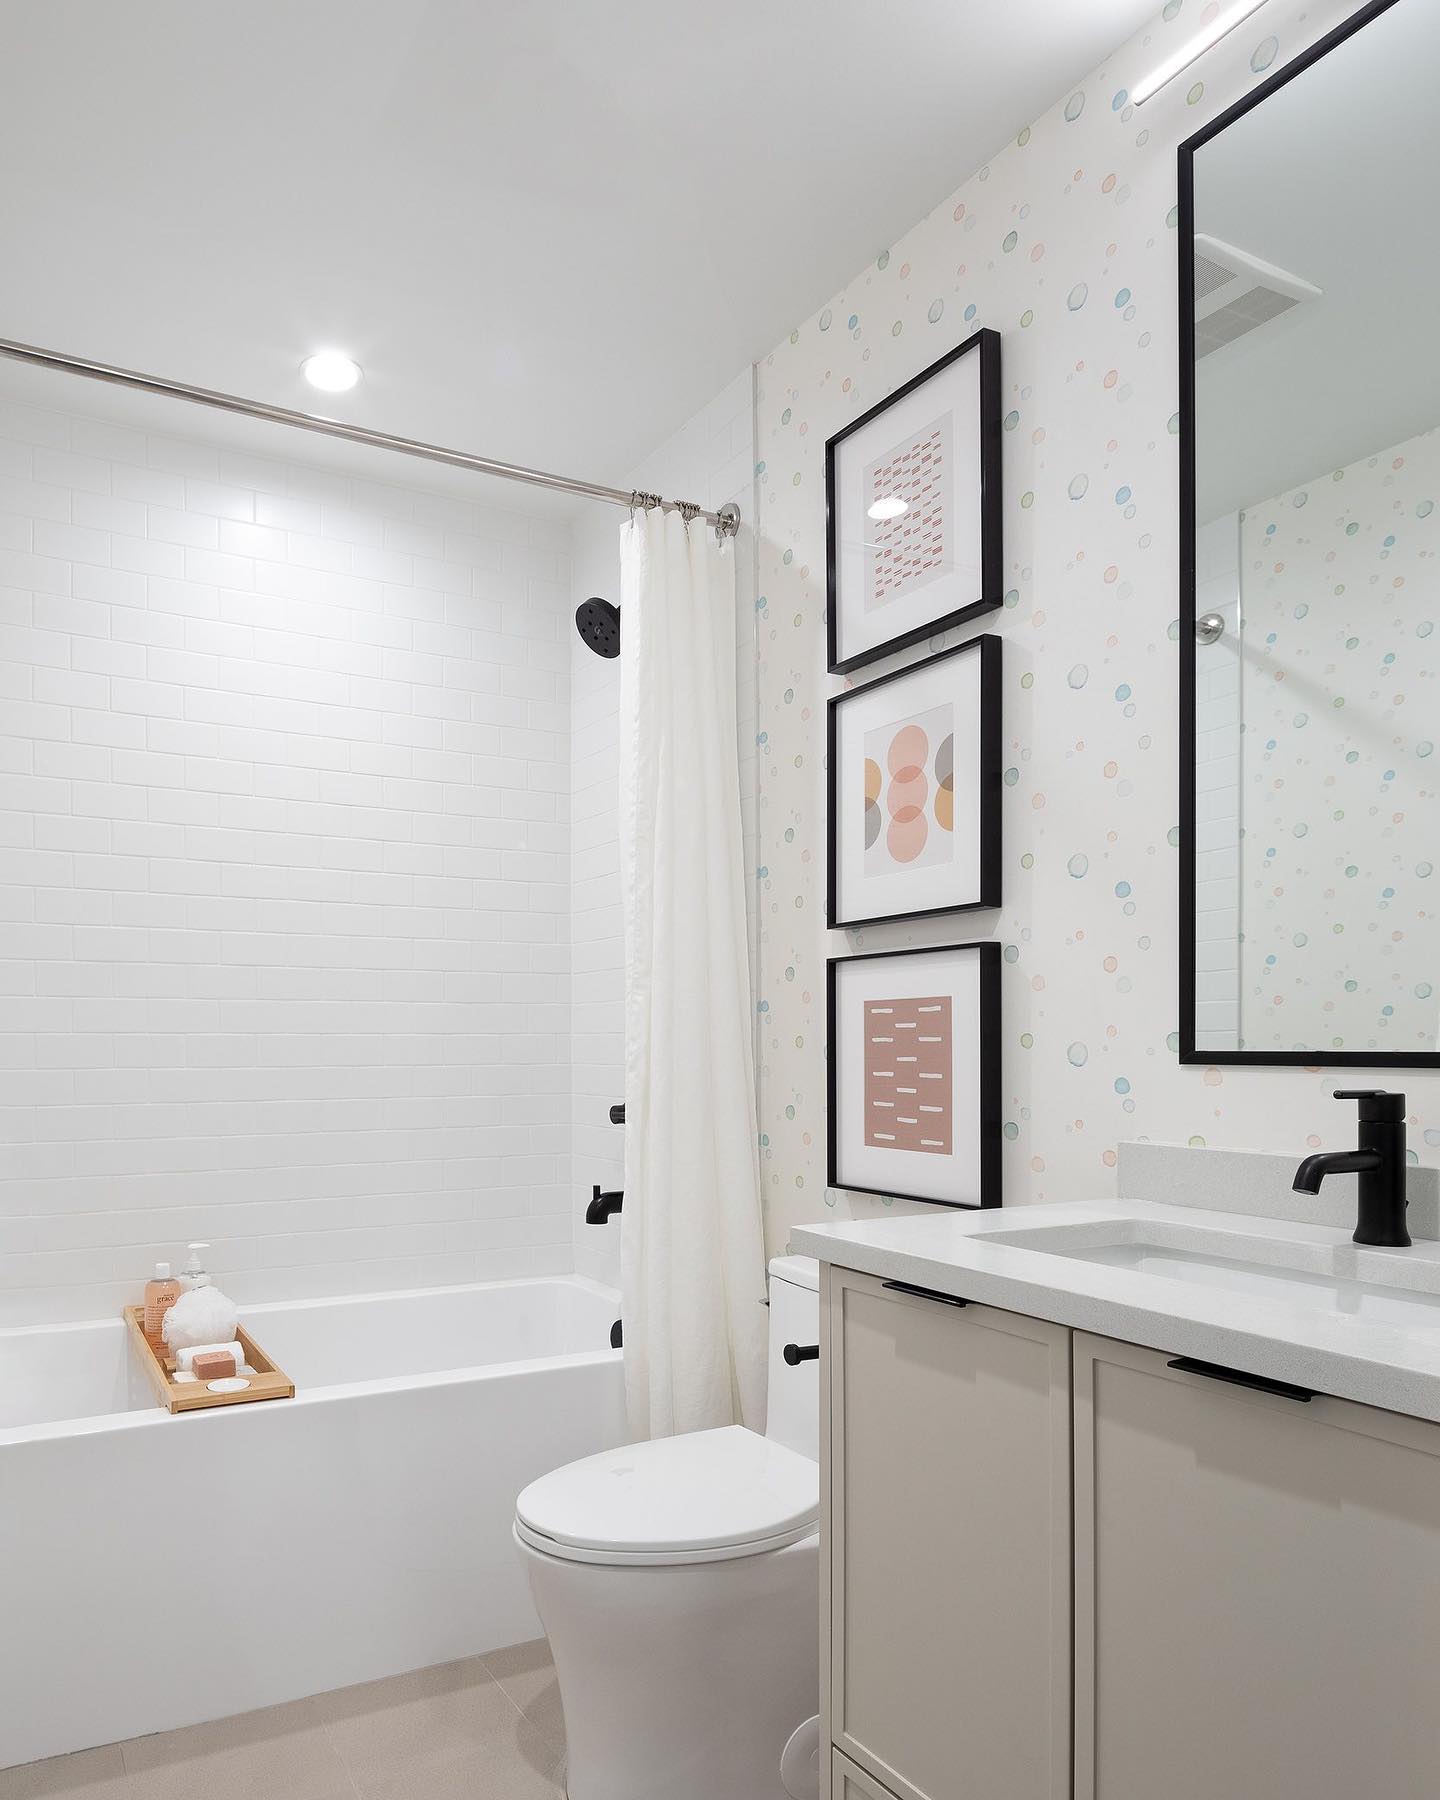 This photo is from one of our recent projects Heath by @bmgroupintl 40 boutique  family townhomes in Langley. Pictured here is the main bath which includes a slim painted shaker door and black accents. The playful wallpaper and art define it as the kid's  bath.

#area3 #area3design #heath #heathlangley #modernfamilytownhome  #modernfamilytownhomedesign #washroomdesign #vanitydesign #modernshakerdoor #sunrisekitchens #blackframedmirror #Deltaplumbing #blackaccents #blackplumbing